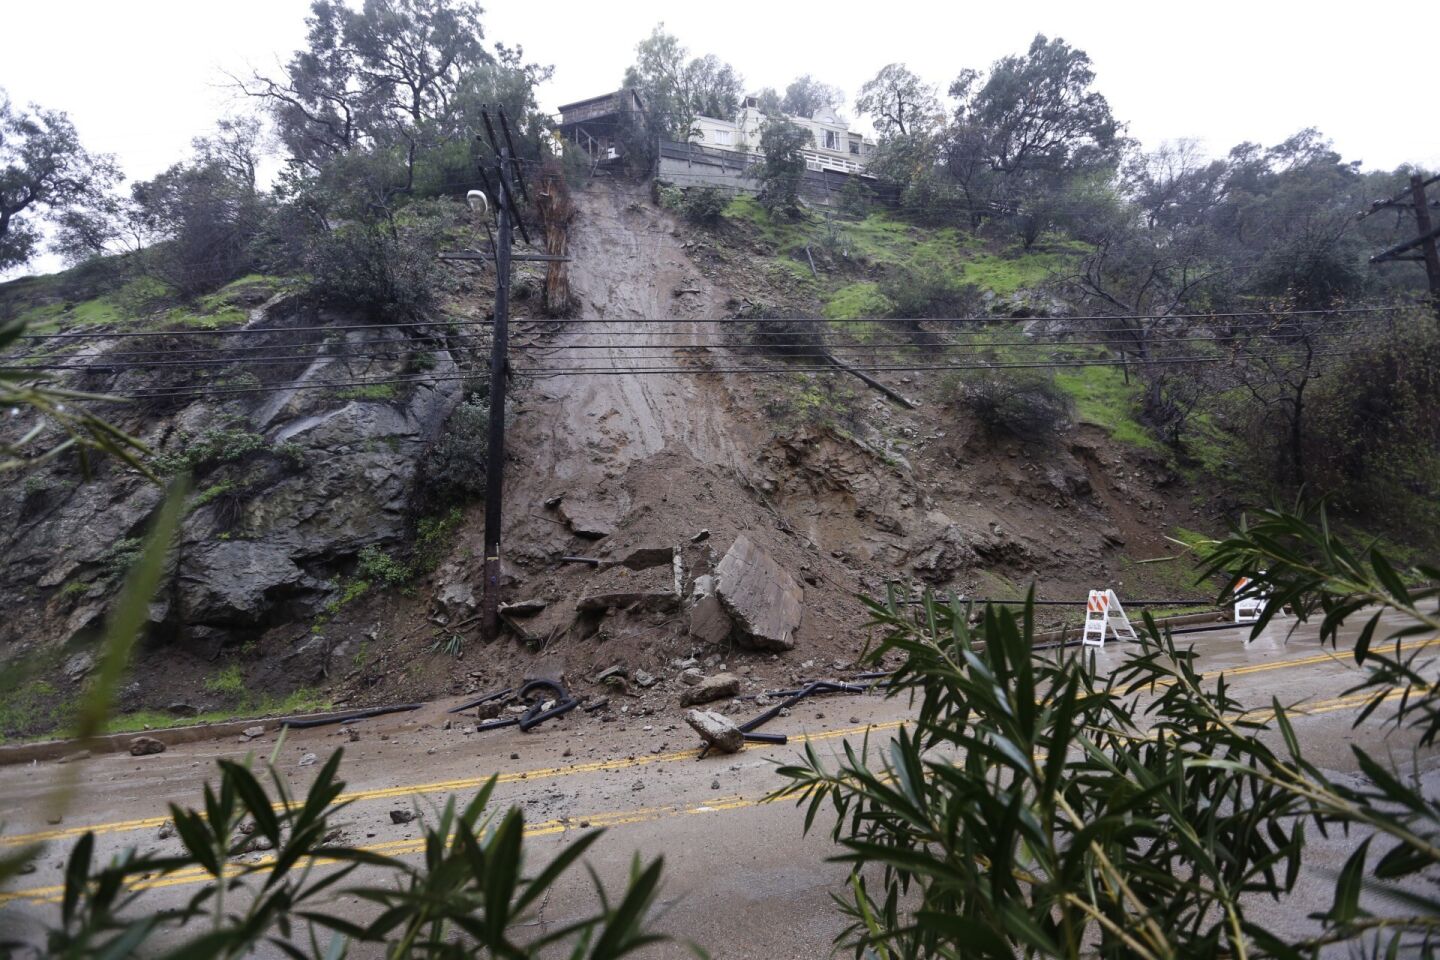 Laurel Canyon Boulevard remained closed in both directions Thursday morning in the Hollywood Hills after part of a home's concrete foundation tumbled down a hillside after a round of rainfall.